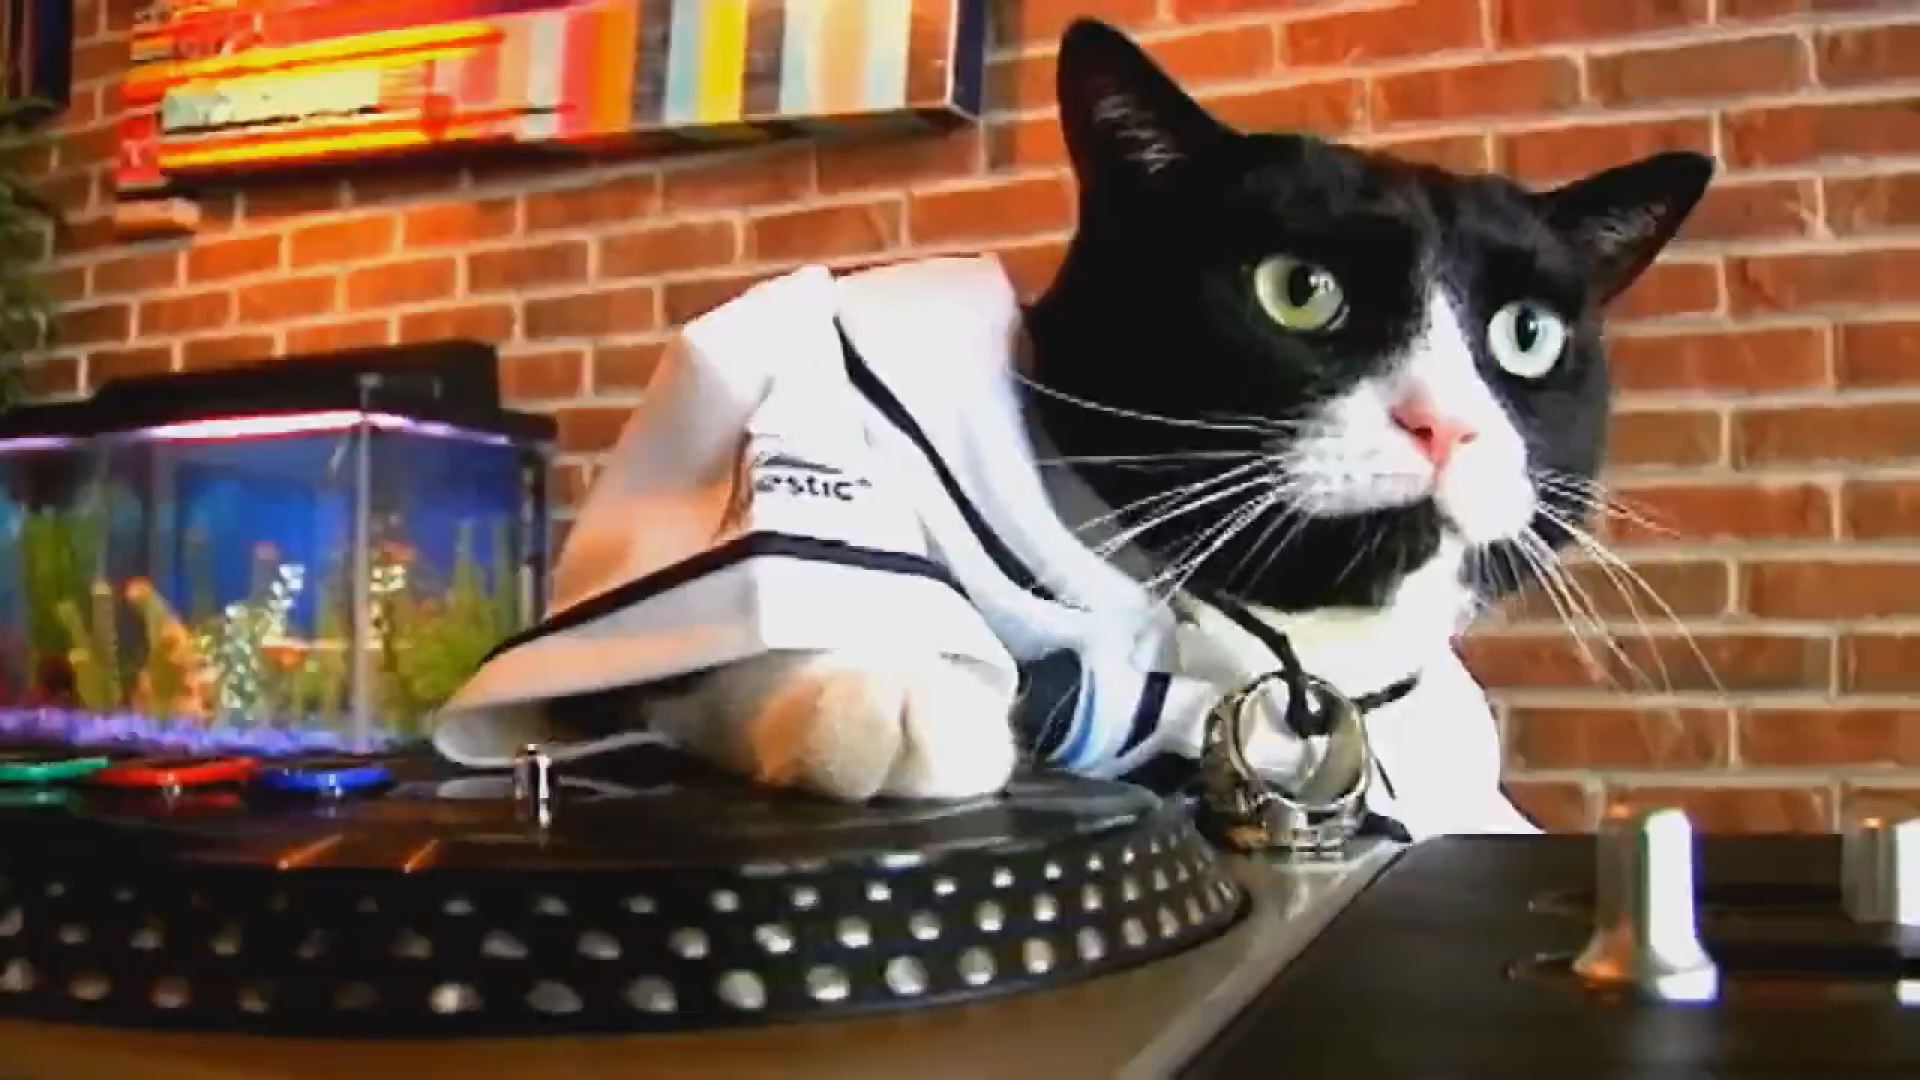 DJ Kitty with a tampa bay rays hat :)